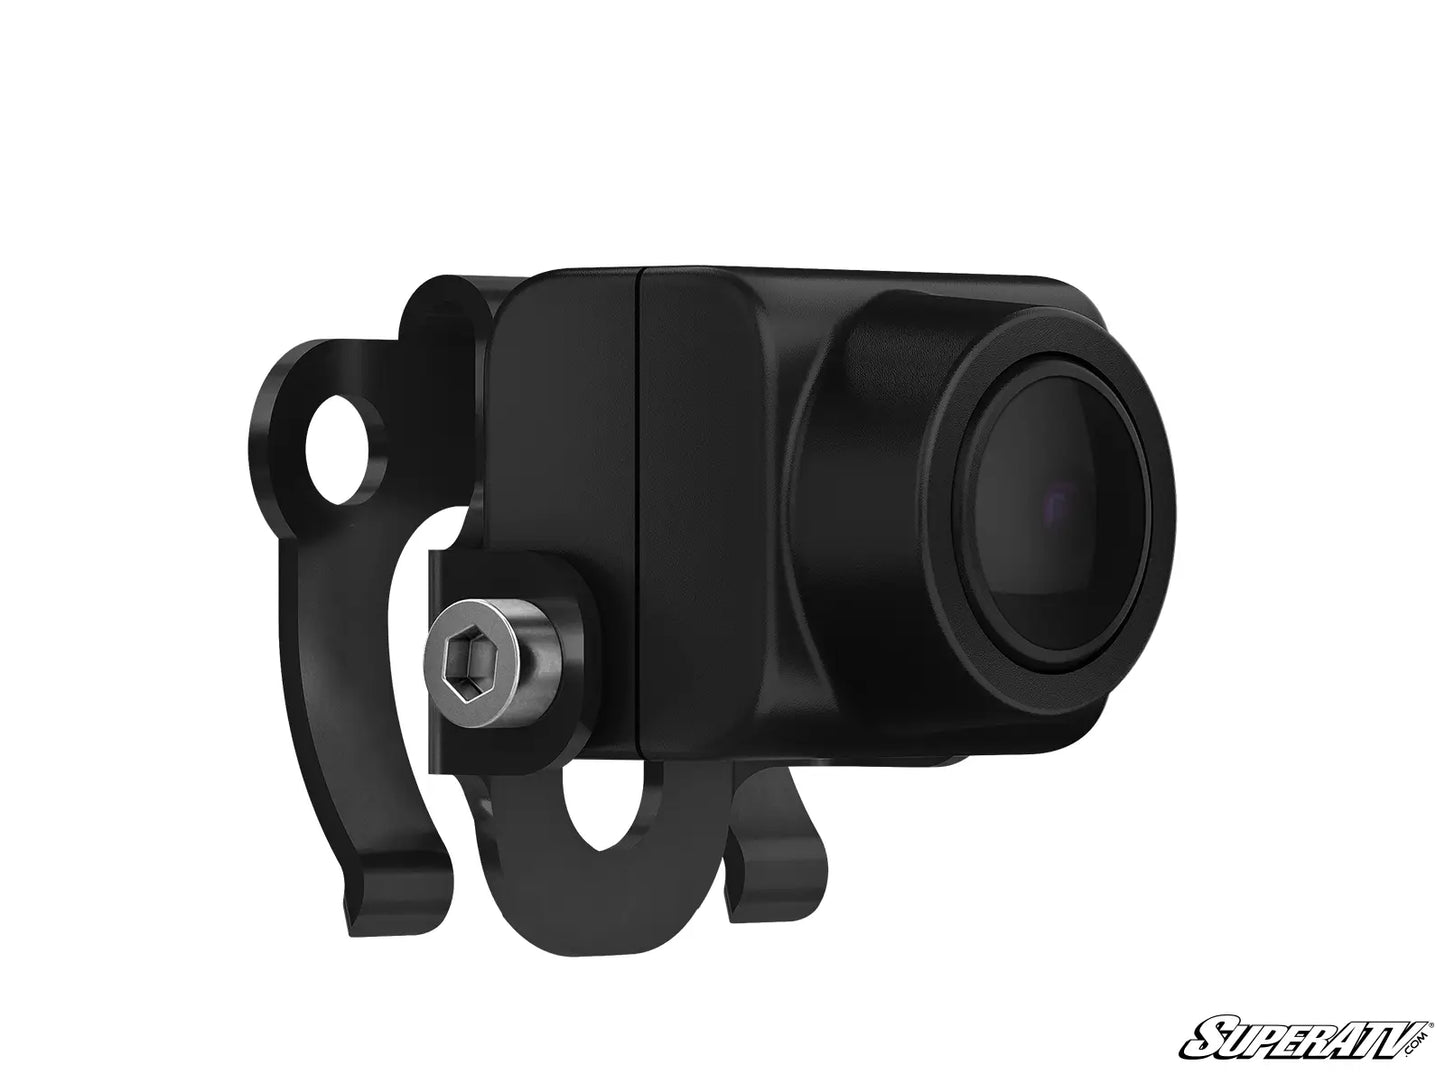 Garmin BC 50 wireless backup camera with license plate mount